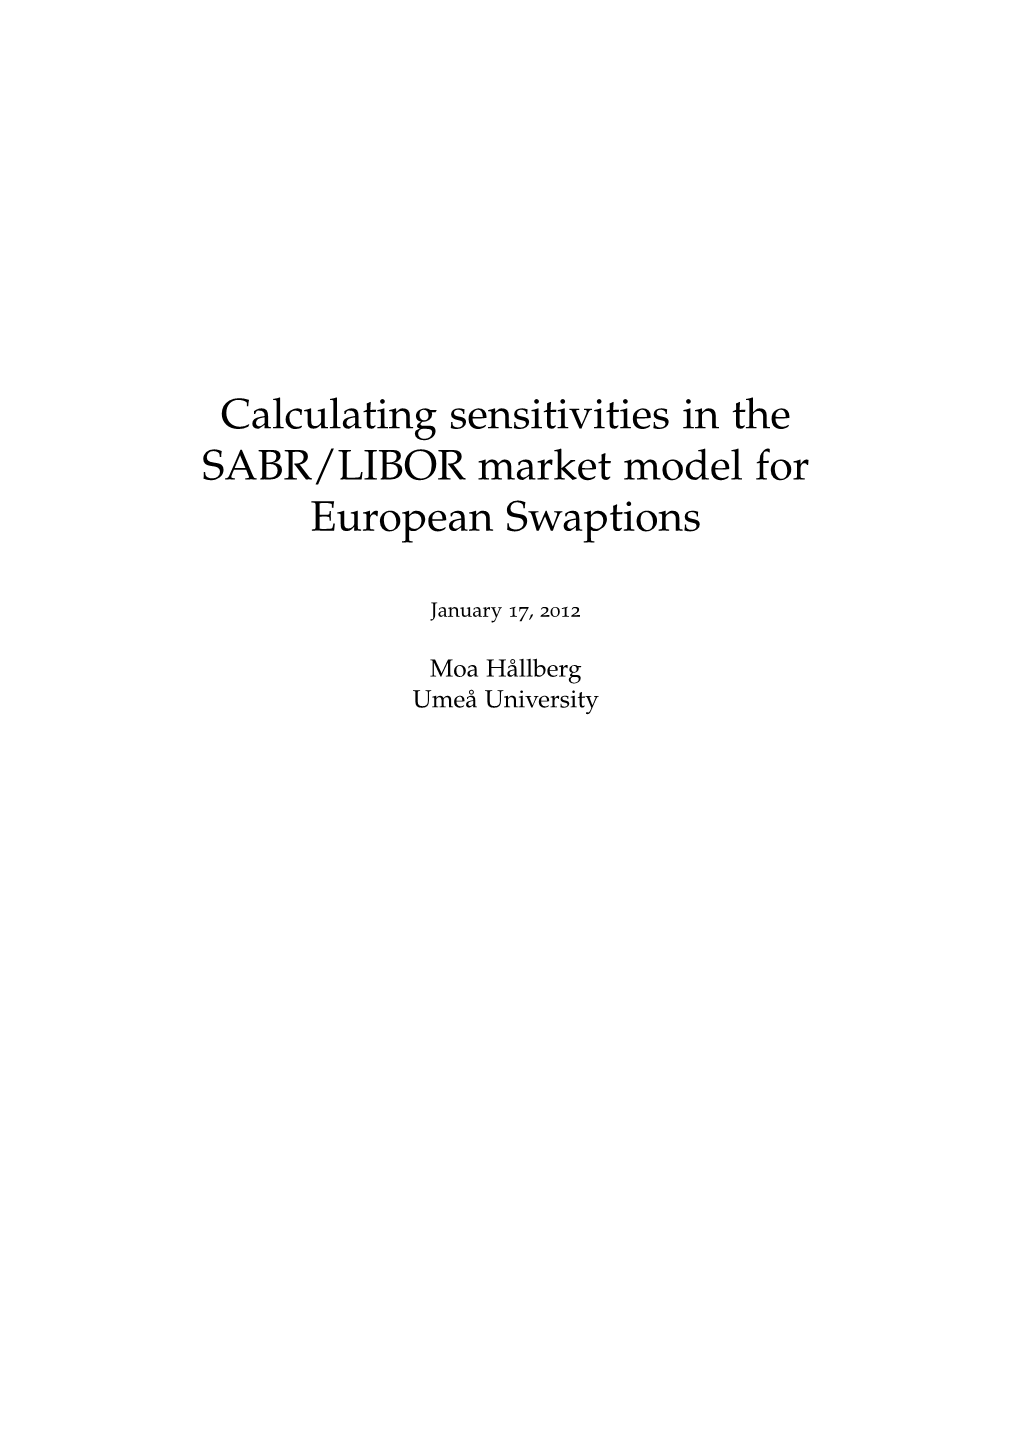 Calculating Sensitivities in the SABR/LIBOR Market Model for European Swaptions